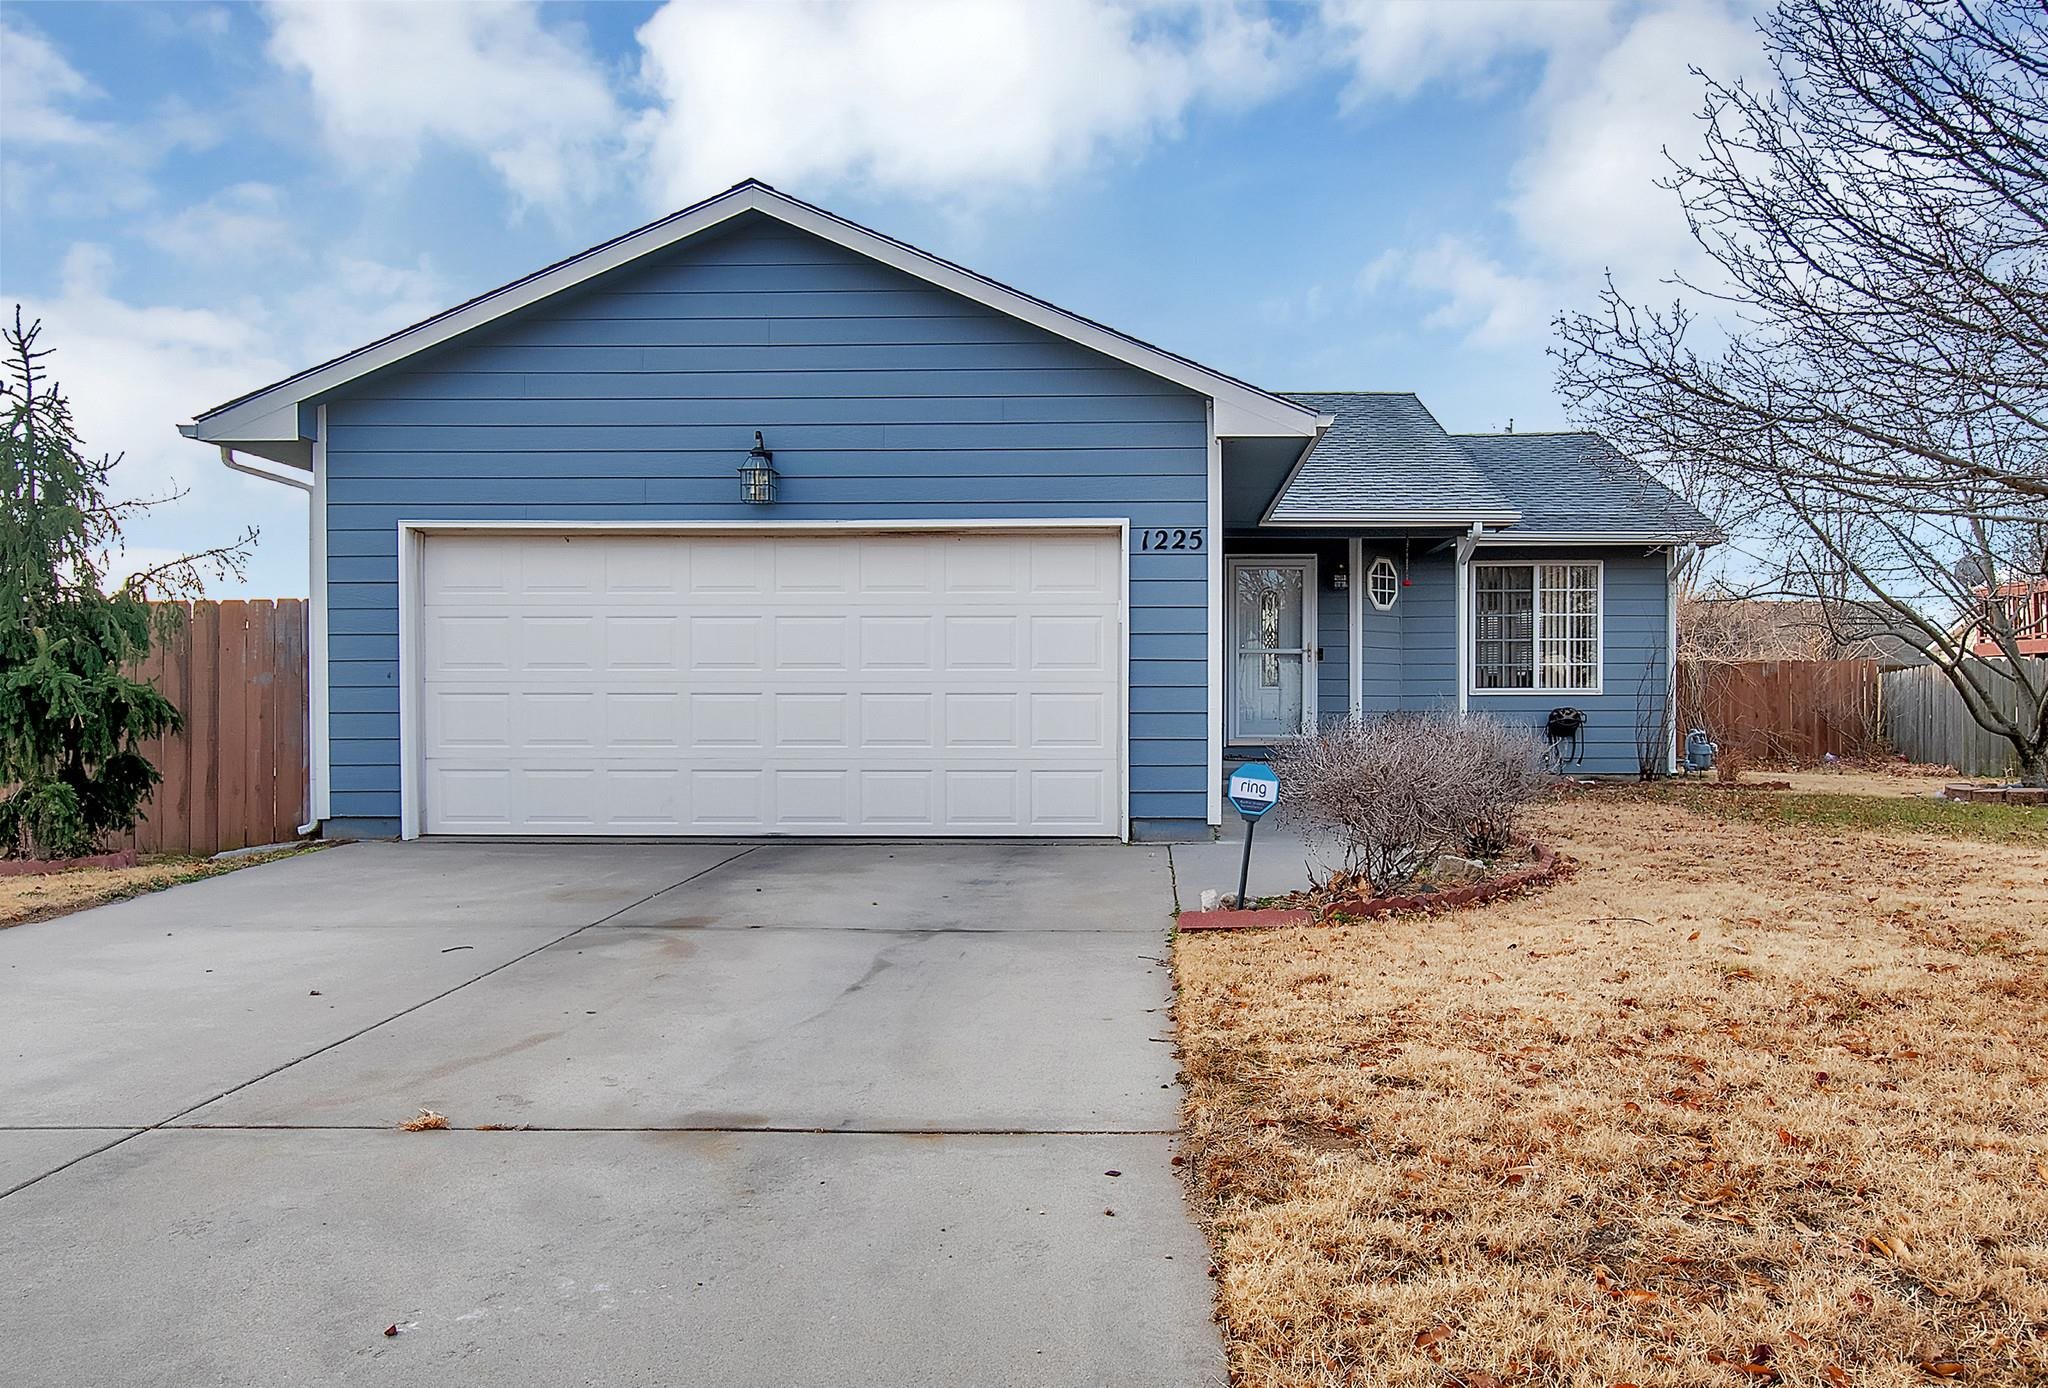 Welcome home to this beautiful 3 bed / 3 bath home in Wichita Kansas! This home offers over 2,000sqf